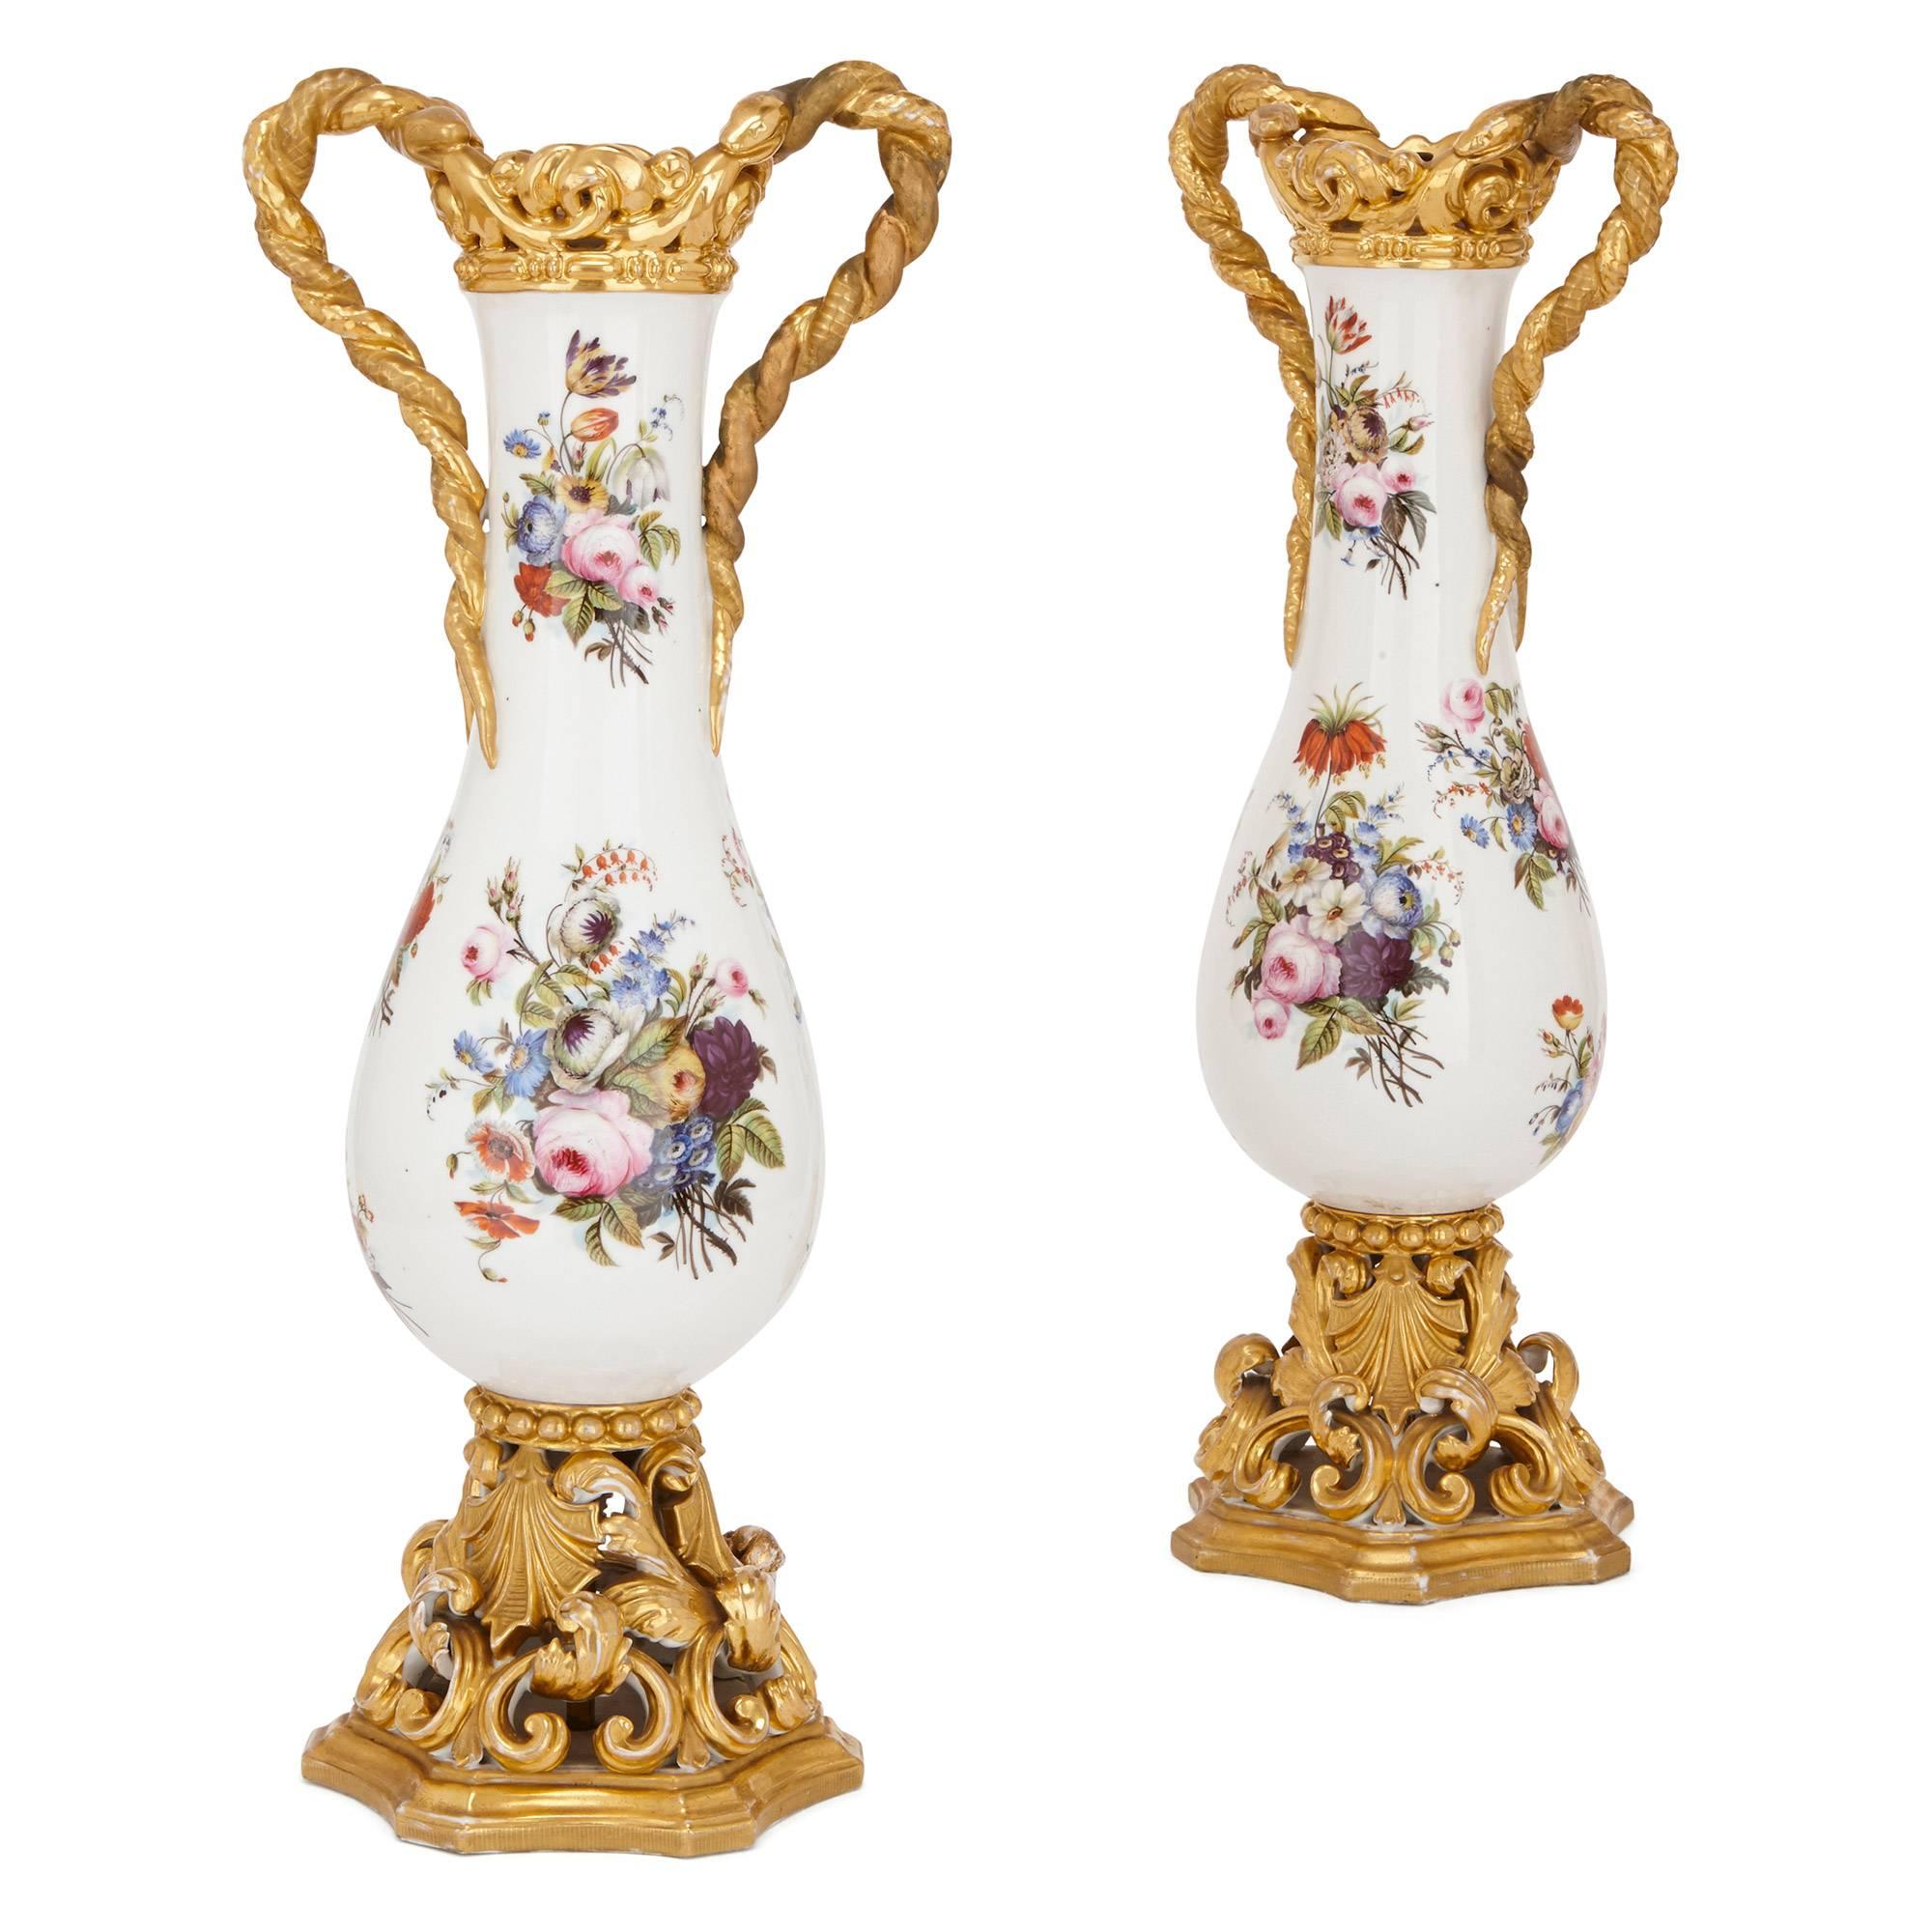 Pair of Floral Porcelain Vases in the Style of Jacob Petit